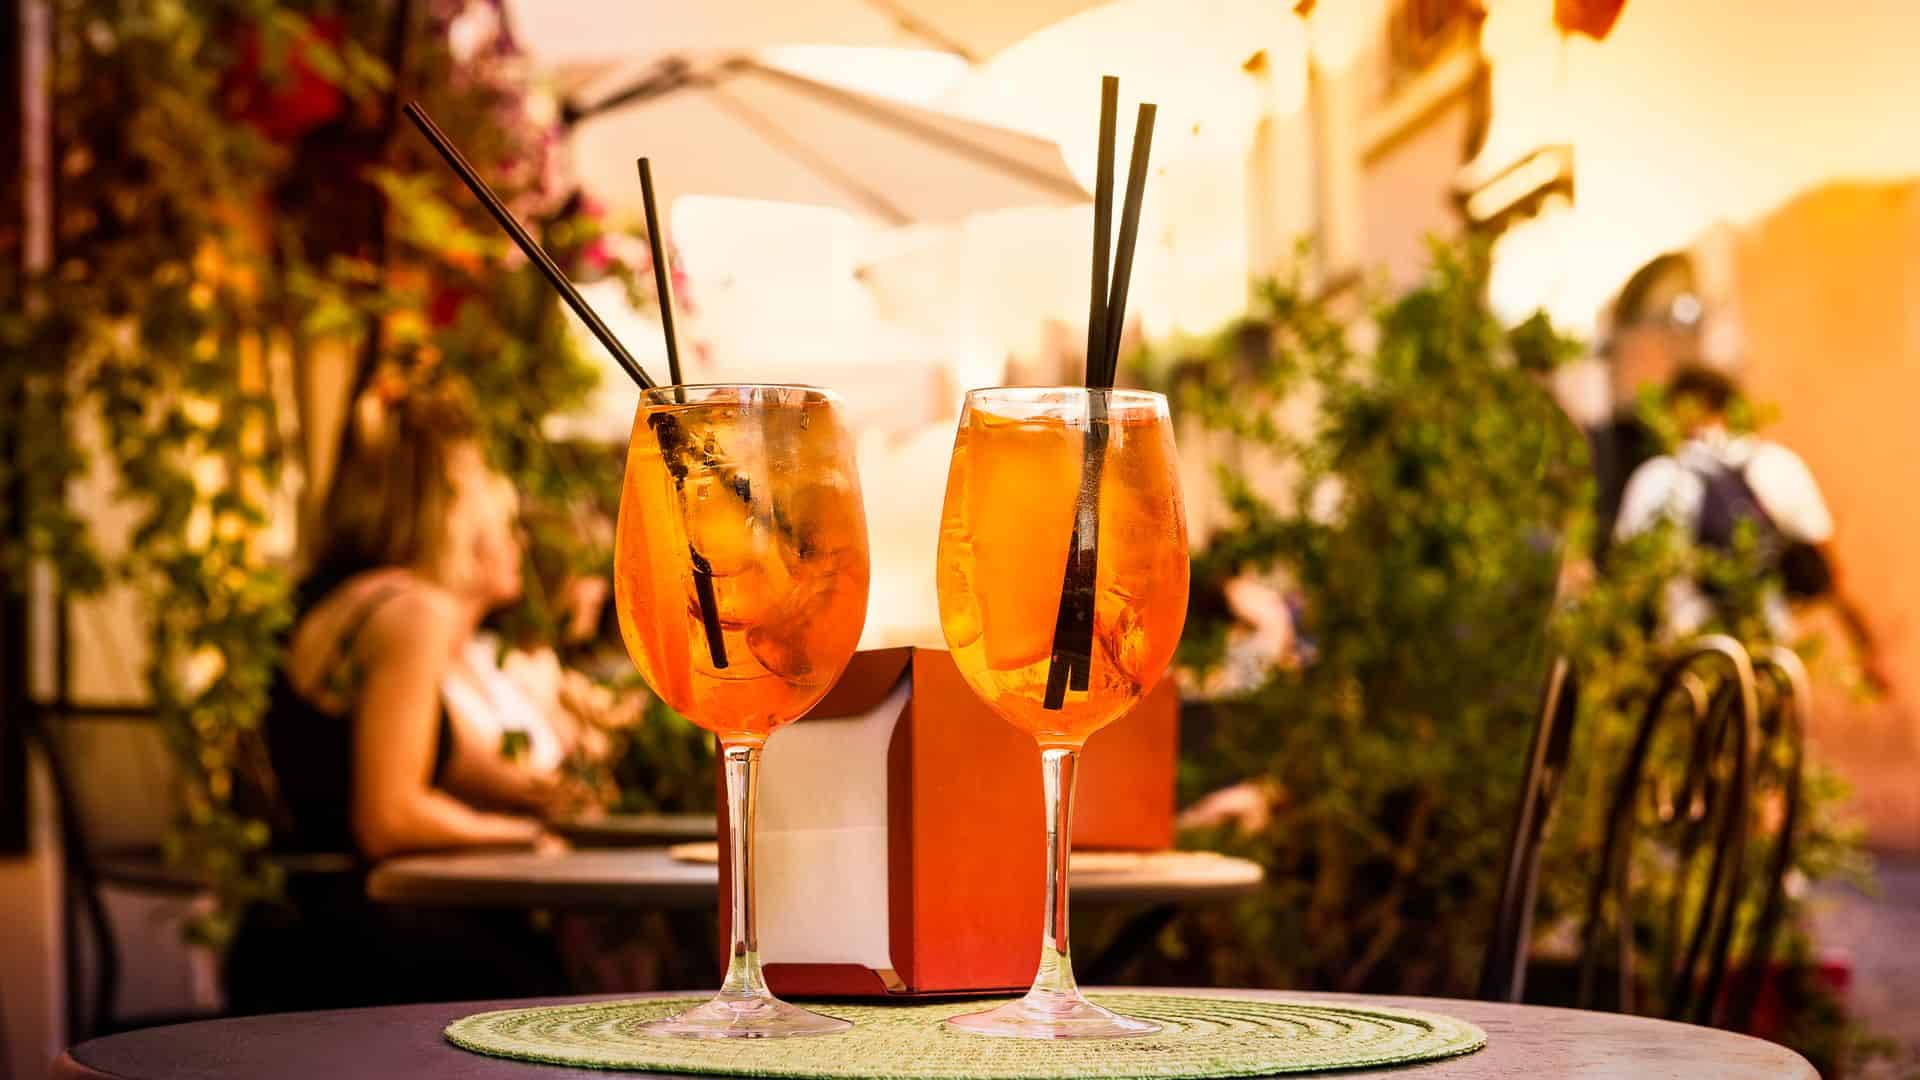 Two aperol spritzs sit on a table in Rome.